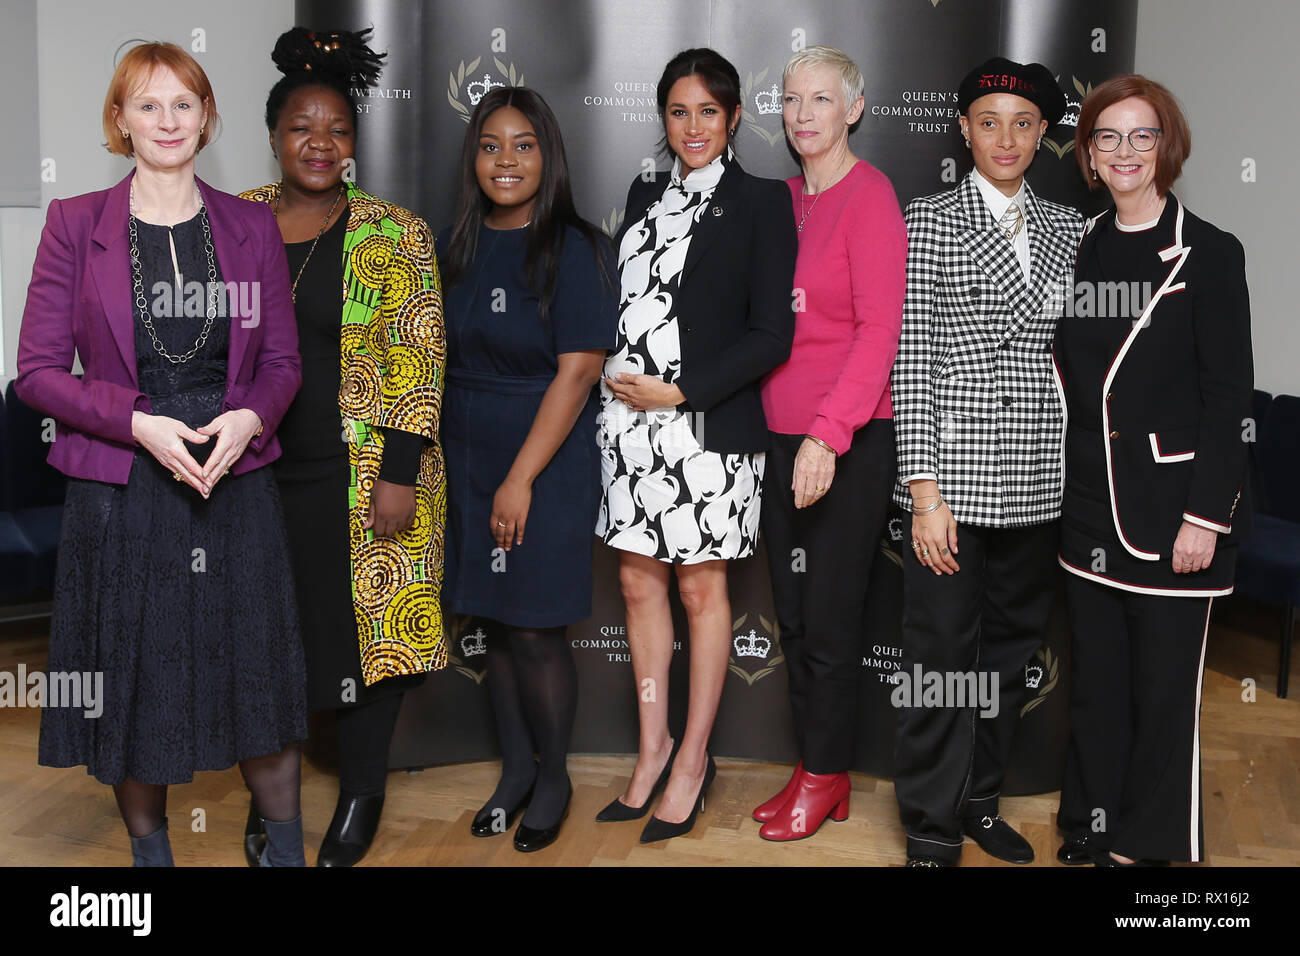 (left to right) Journalist Anne McElvoy, Camfed Regional Director Zimbabwe's Angeline Murimirwa, campaigner Chrisann Jarrett, the Duchess of Sussex, singer Annie Lennox, model Adwoa Aboah and former Australian Prime Minister Julia Gillard before a panel discussion convened by The Queen's Commonwealth Trust to mark International Women's Day at King's College in London. Stock Photo